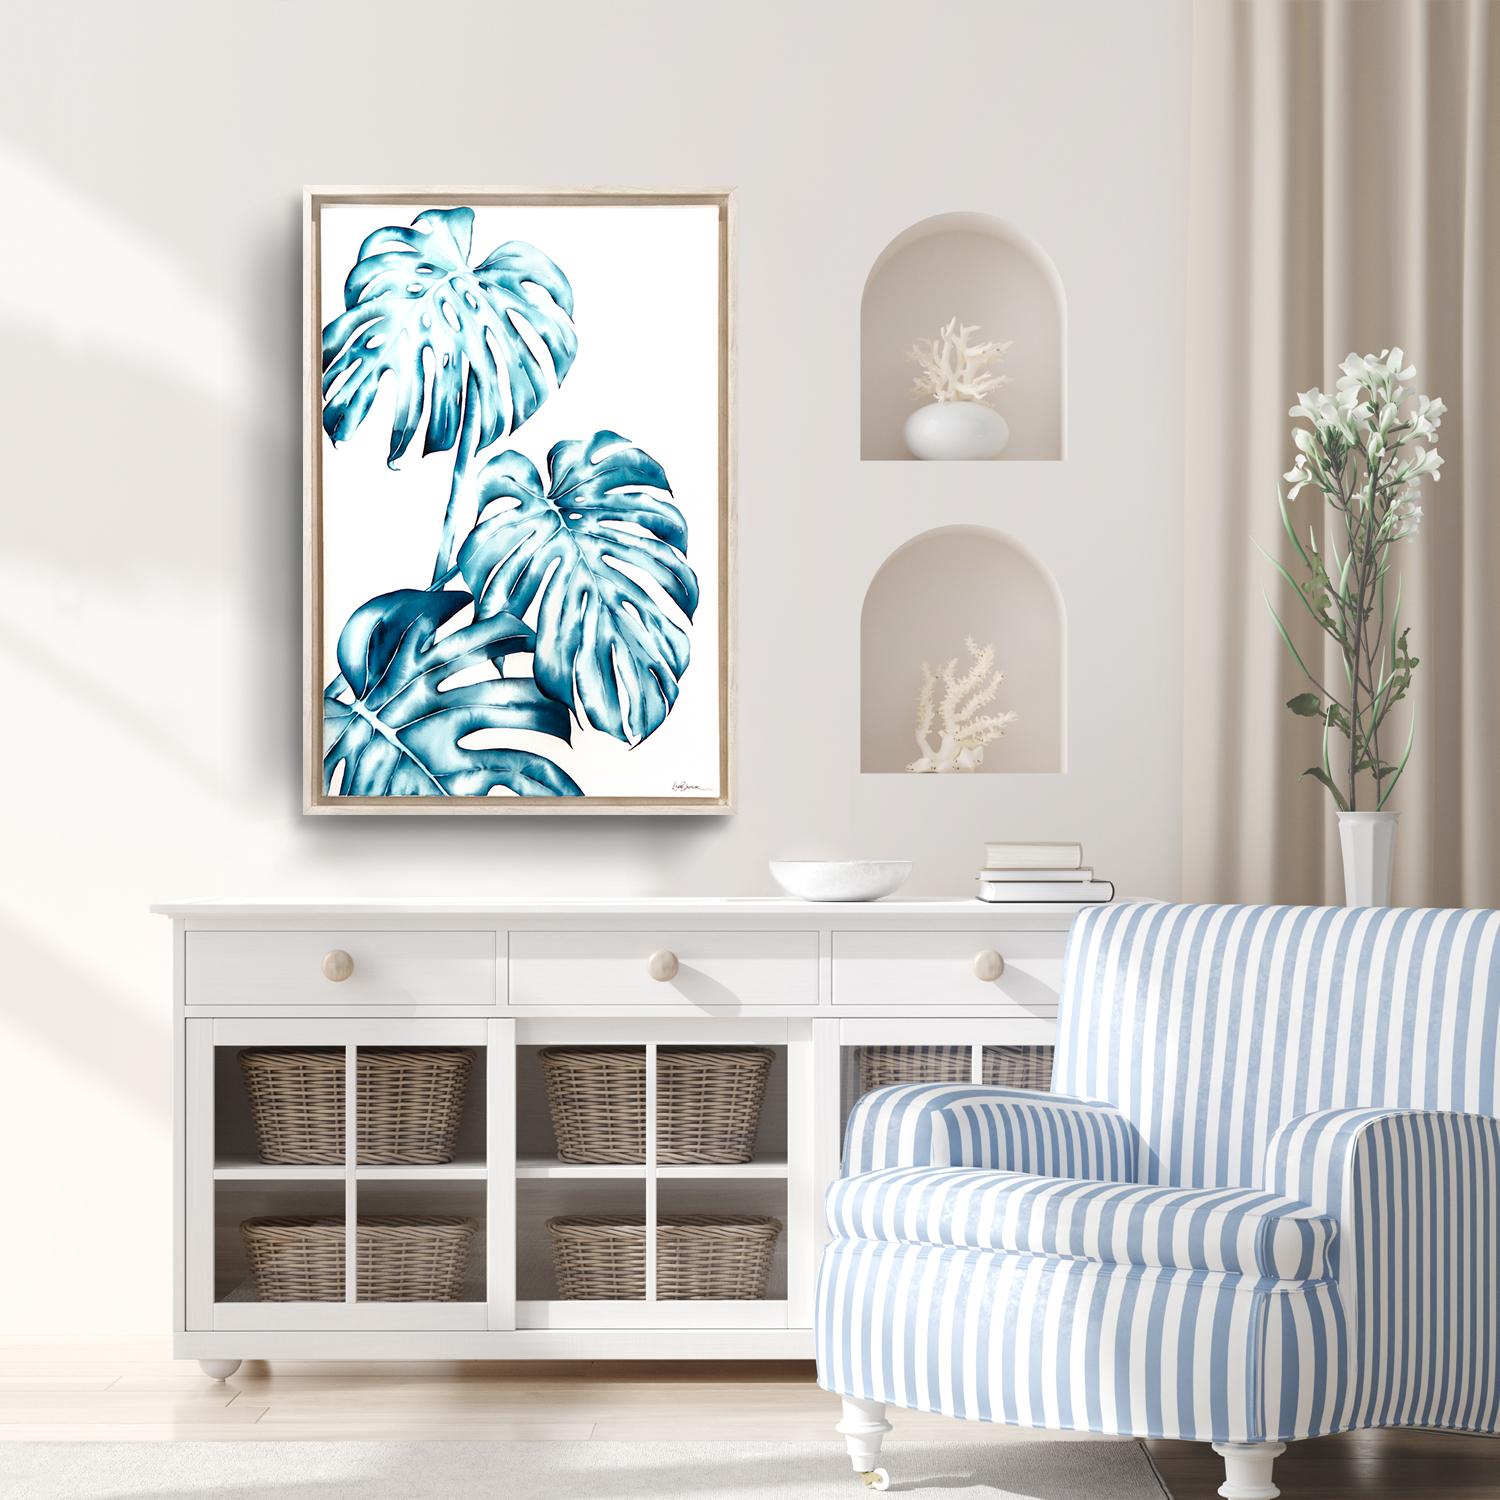 ‘Monstera Trio' Framed Canvas Original Painting features tropical monstera leaves in vibrant tones of teal, and white. The epitome of coastal sophistication, Laurie Duncan’s watercolor masterpieces are so intricately articulated they appear